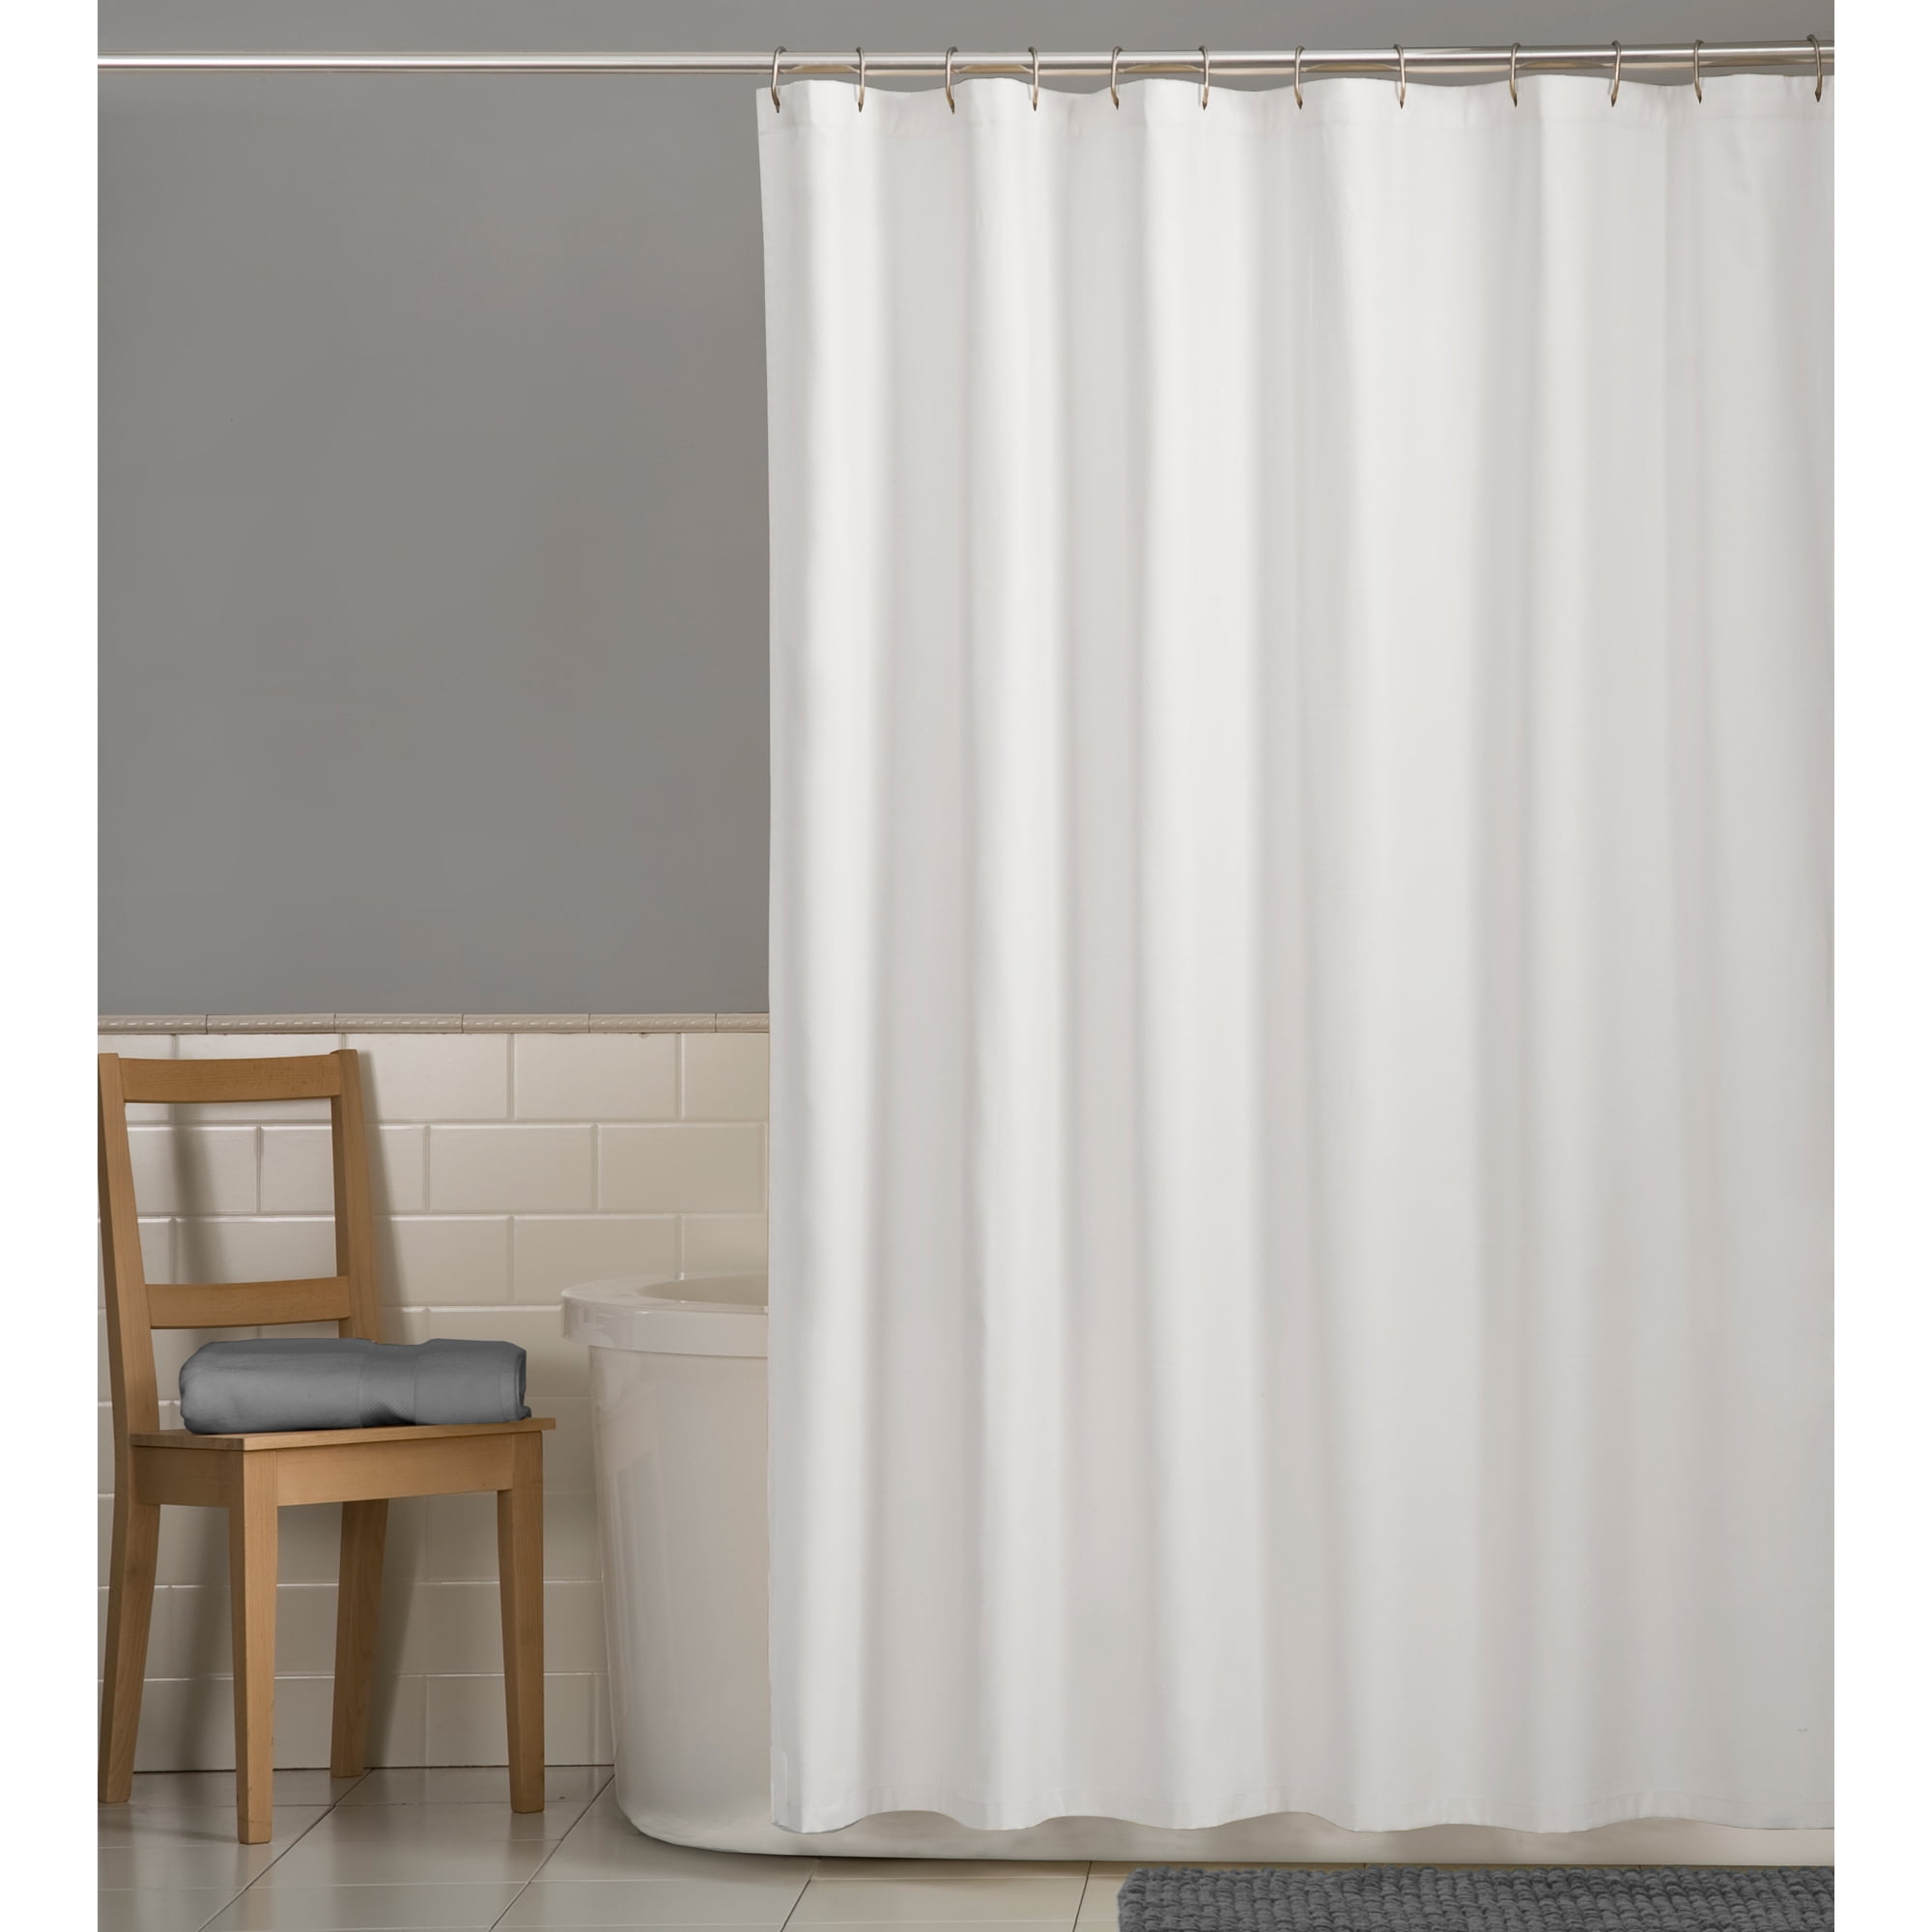 Water Repellent Fabric Shower Curtain Liner, White - Mainstays